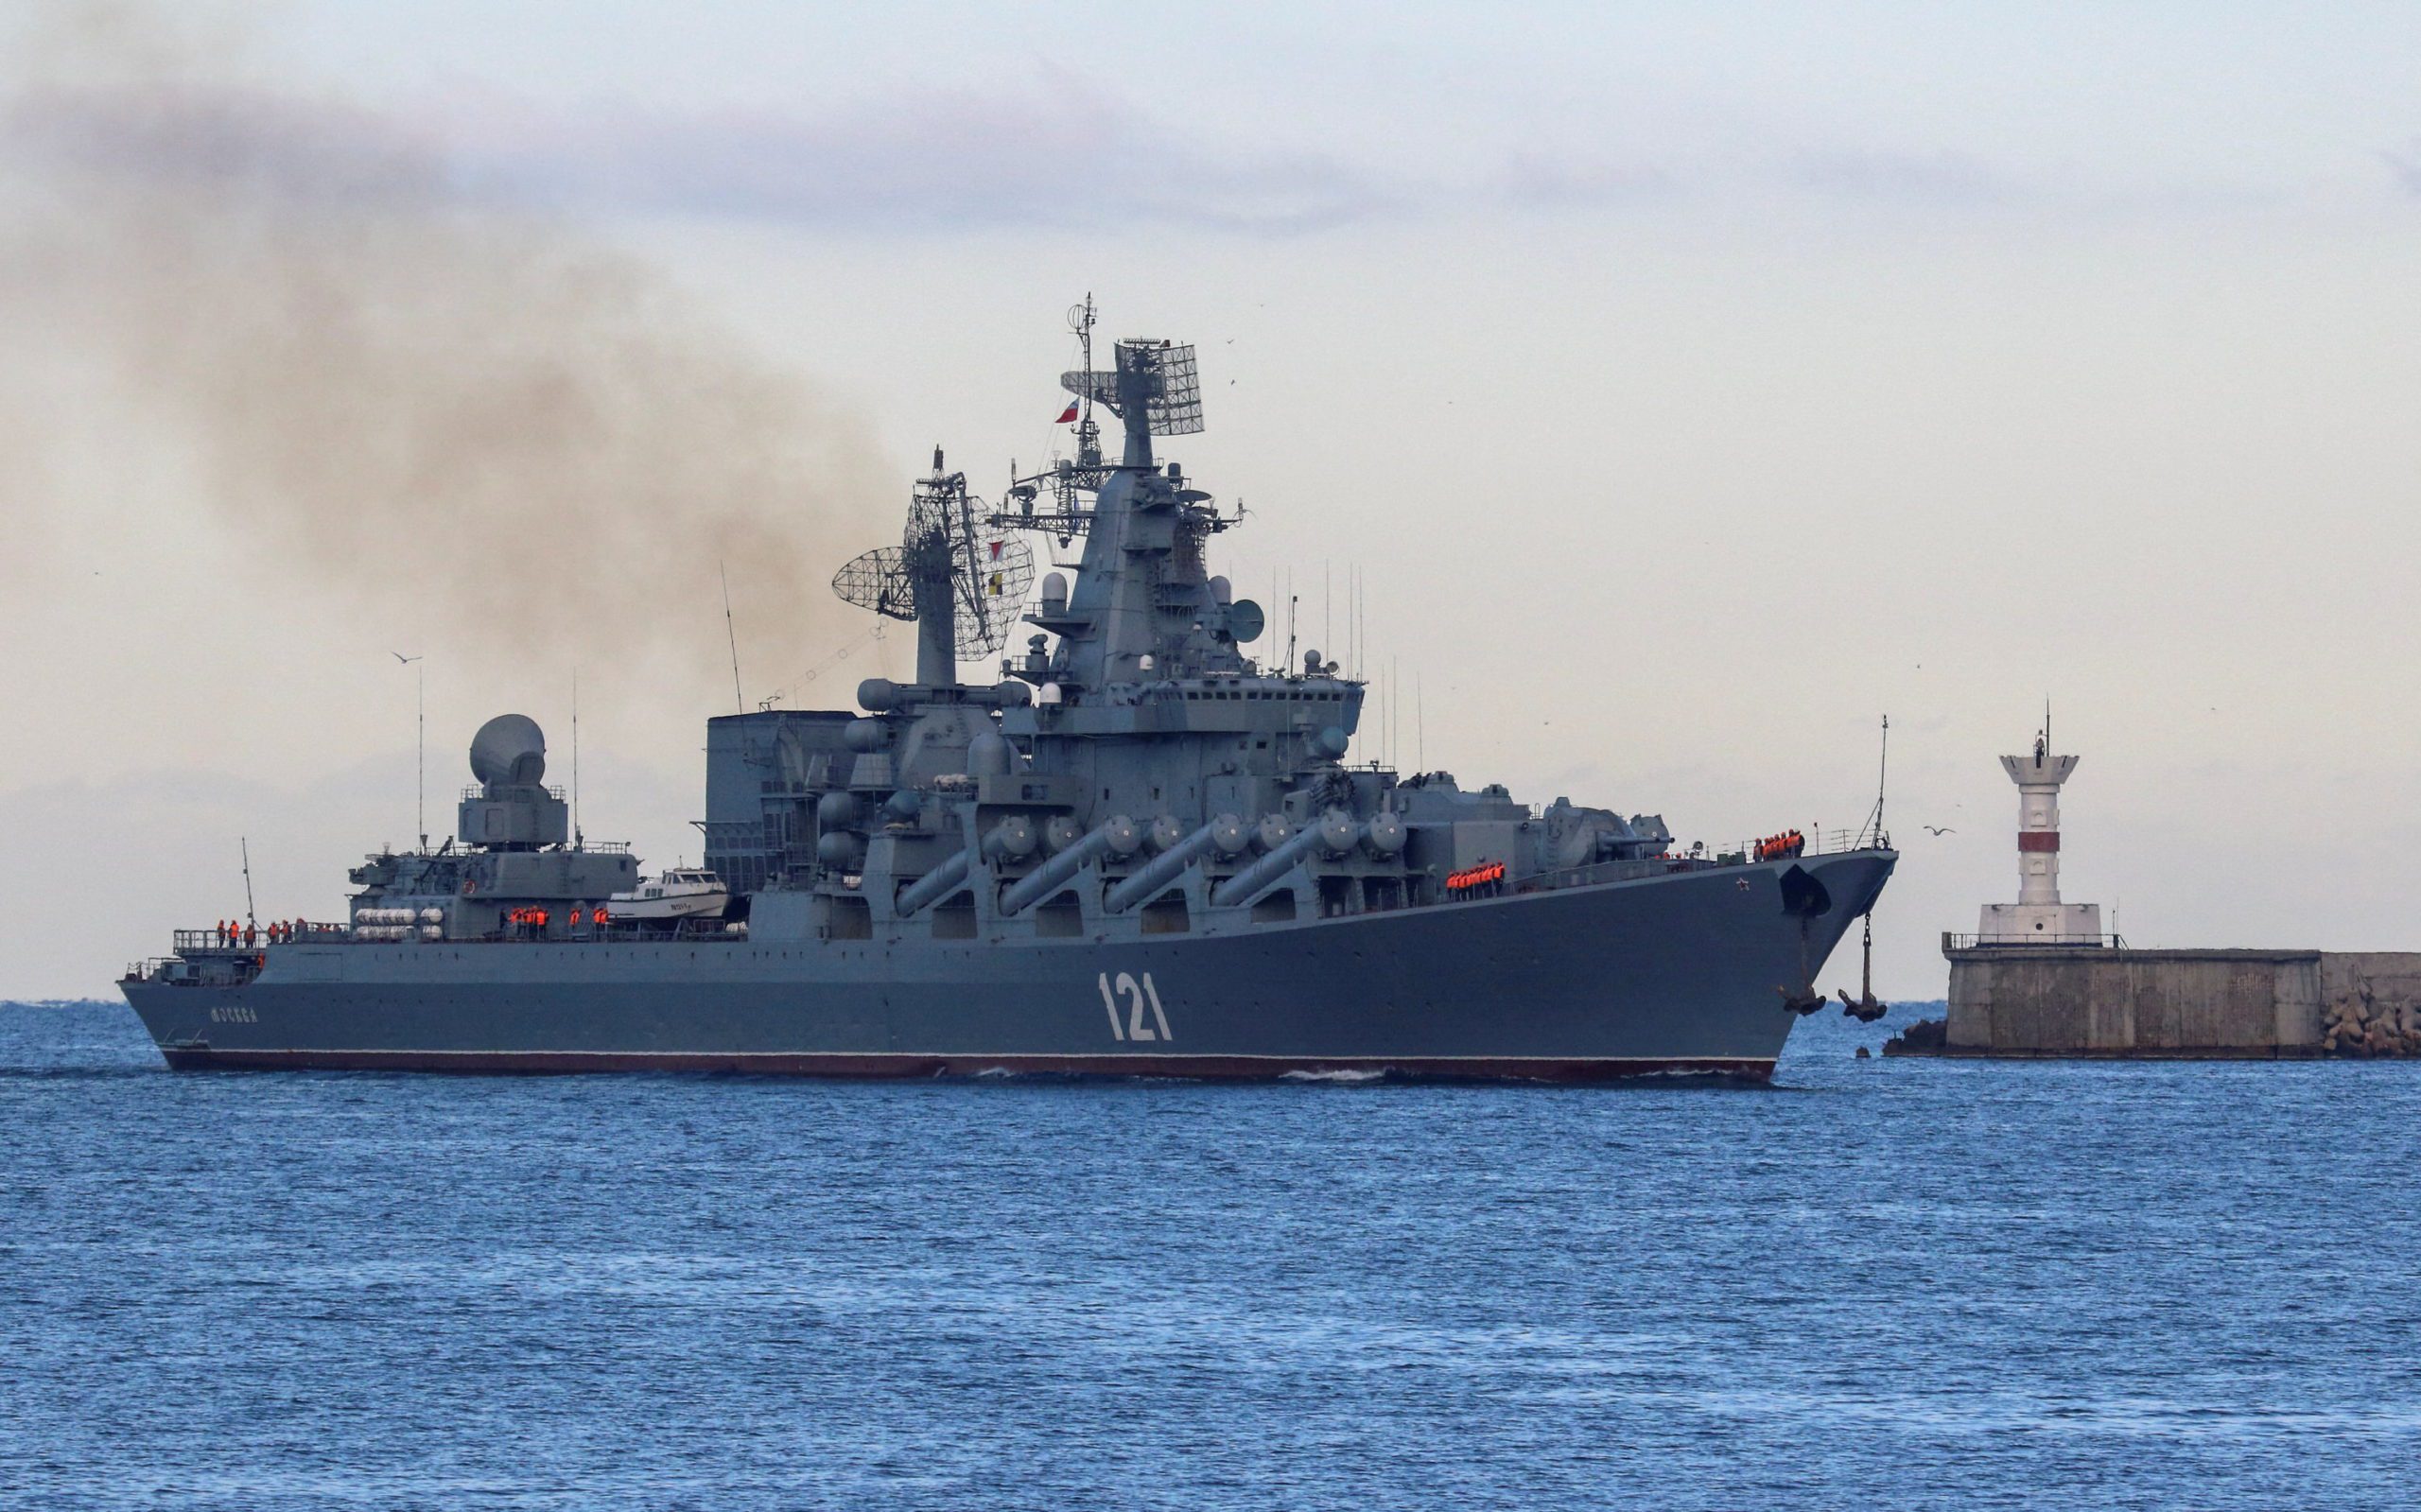 Russian Navy's guided missile cruiser Moskva Ukraine Sinking